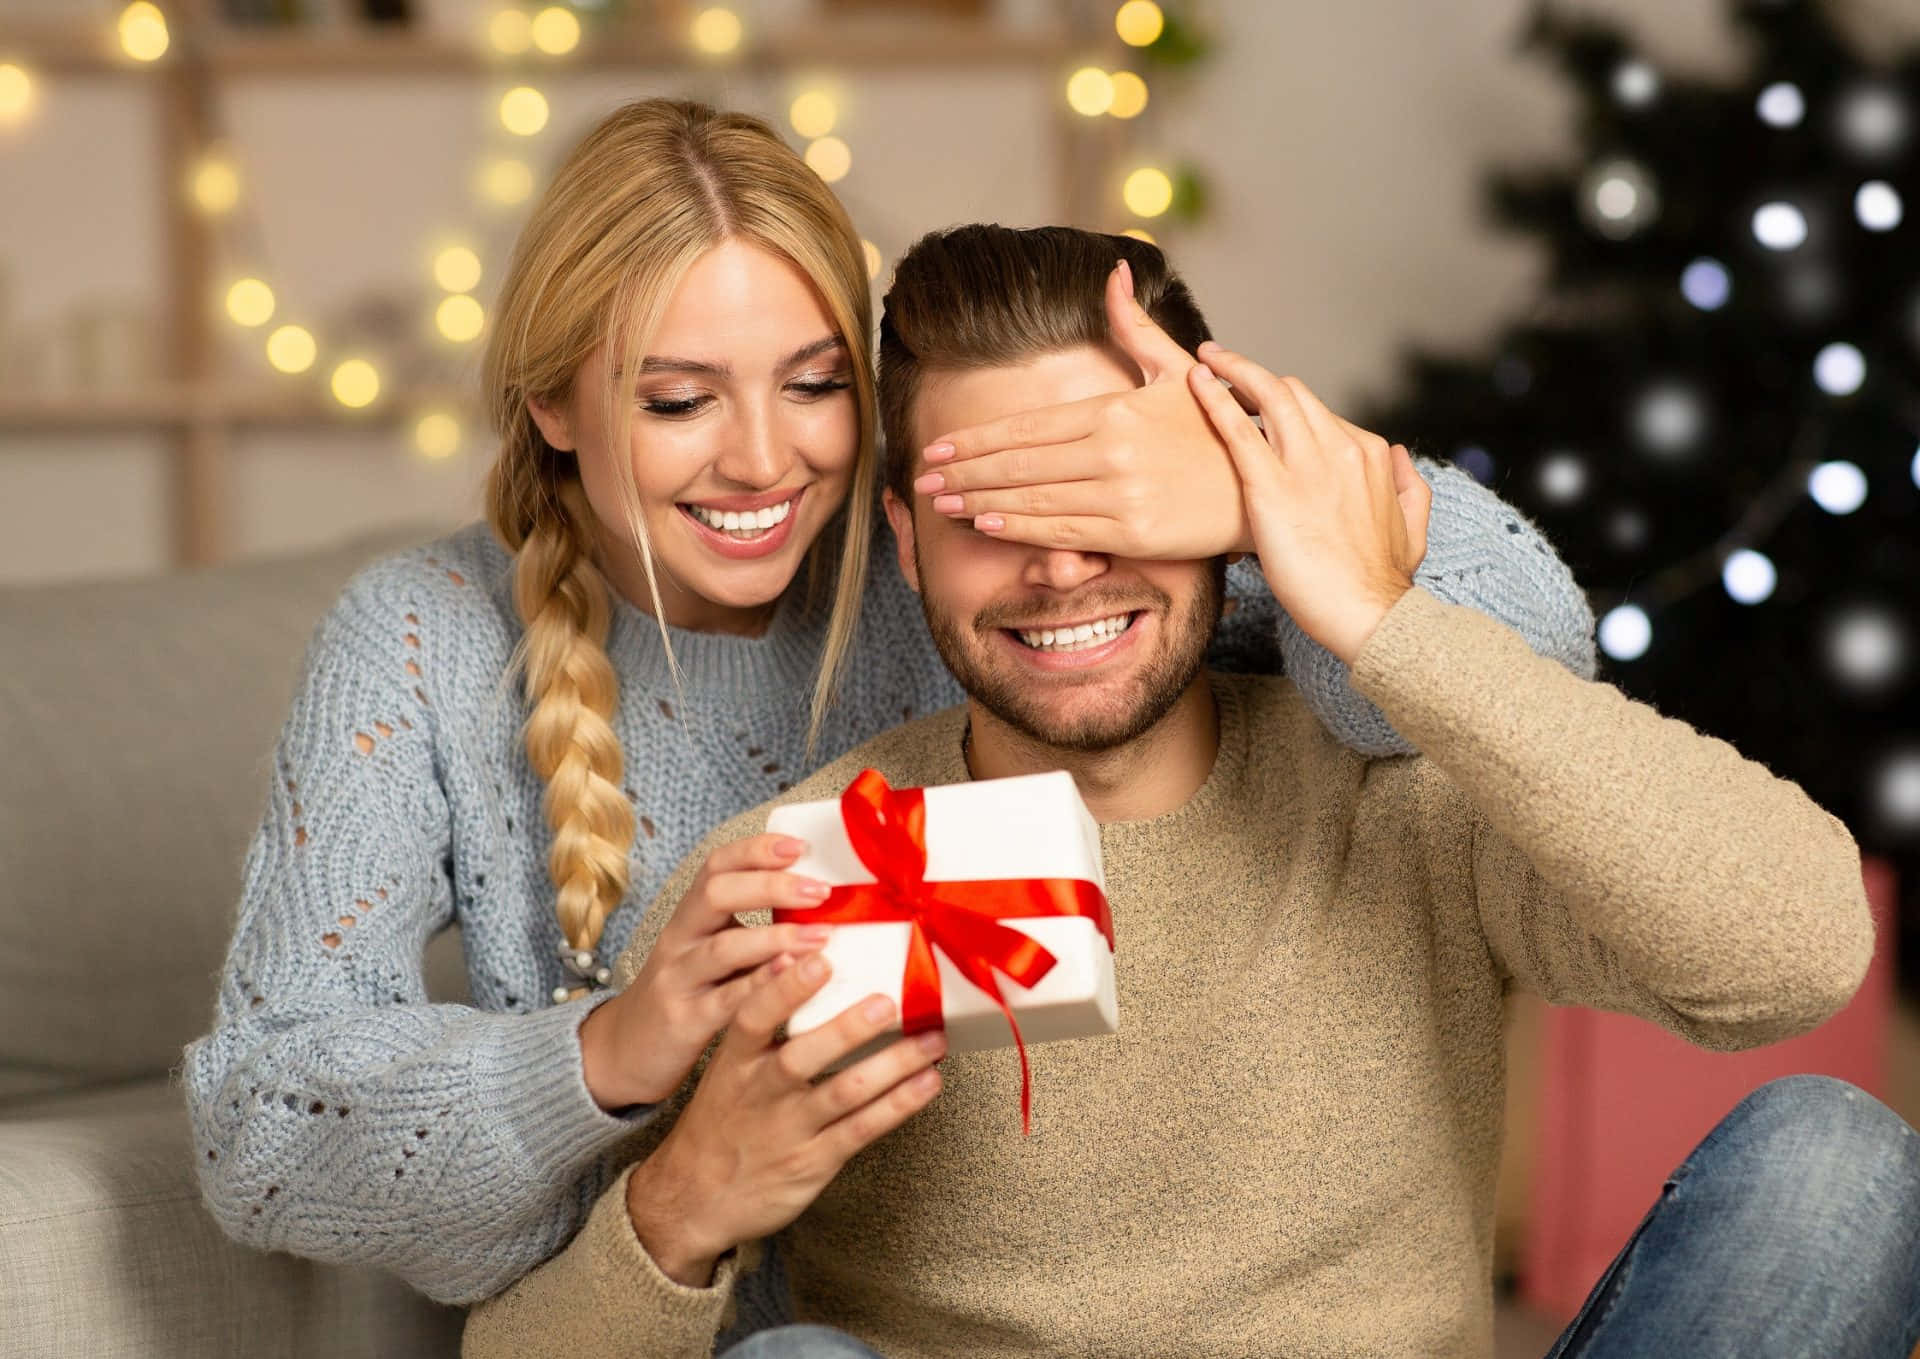 Celebrate Christmas with your special someone this year!